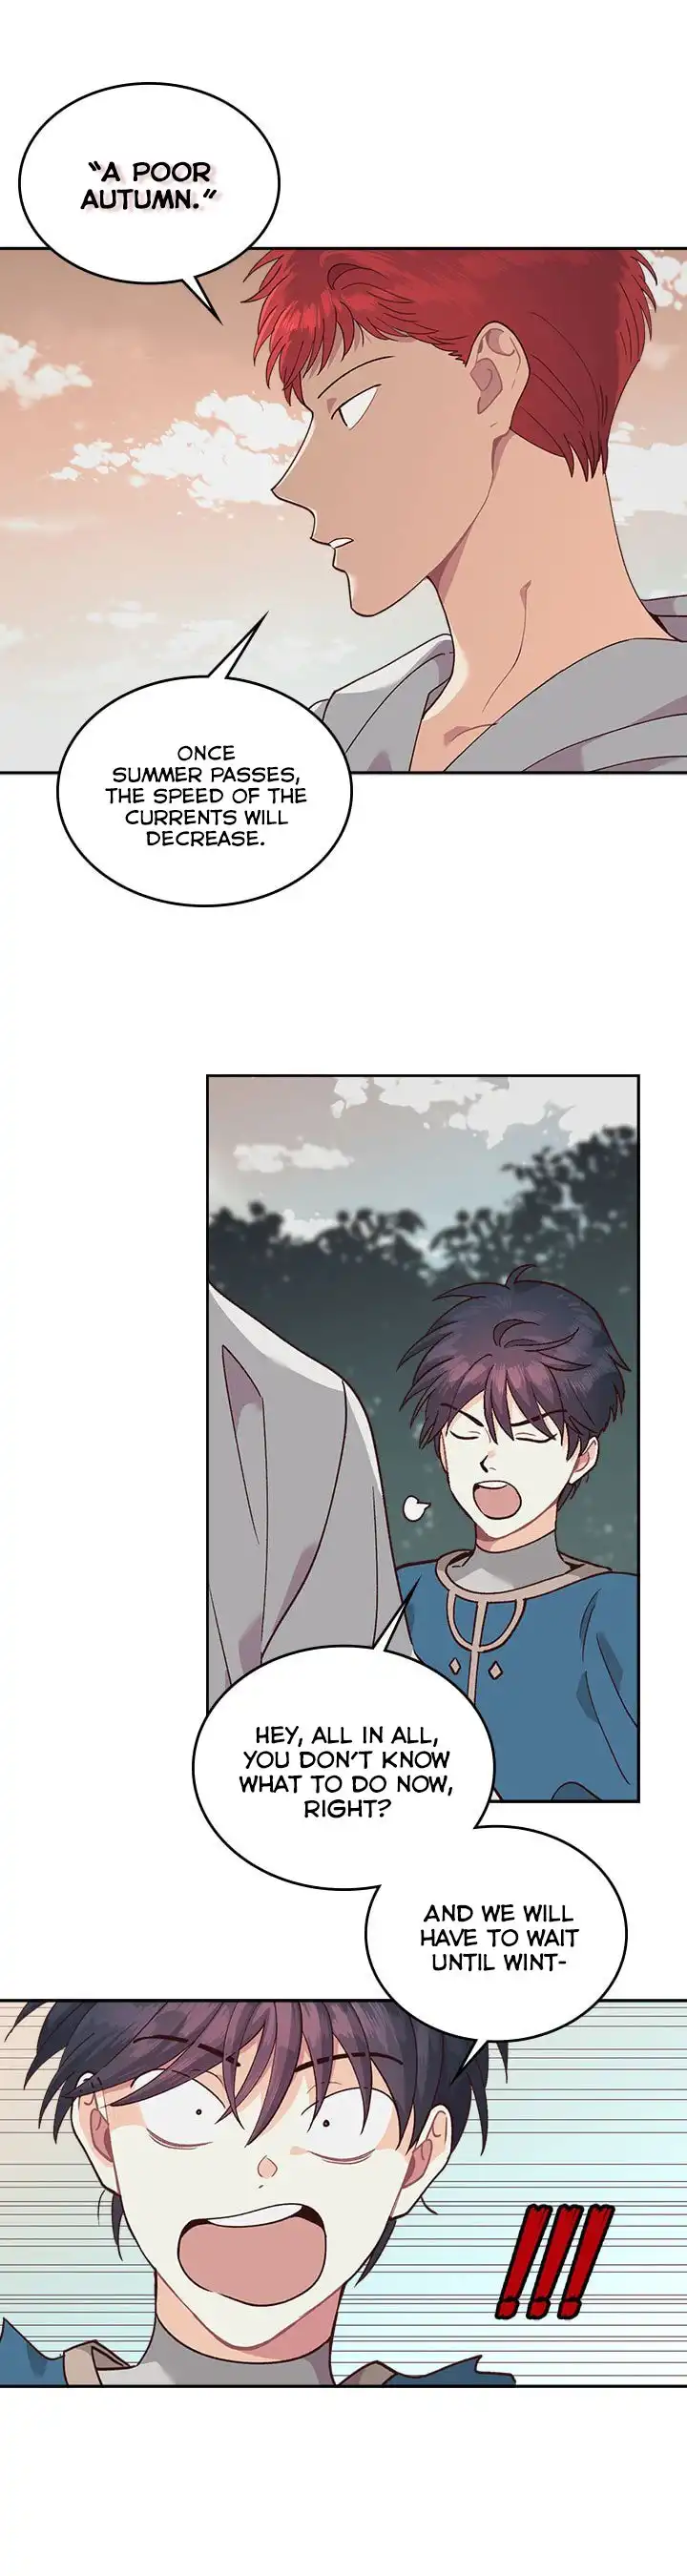 Emperor And The Female Knight Chapter 20